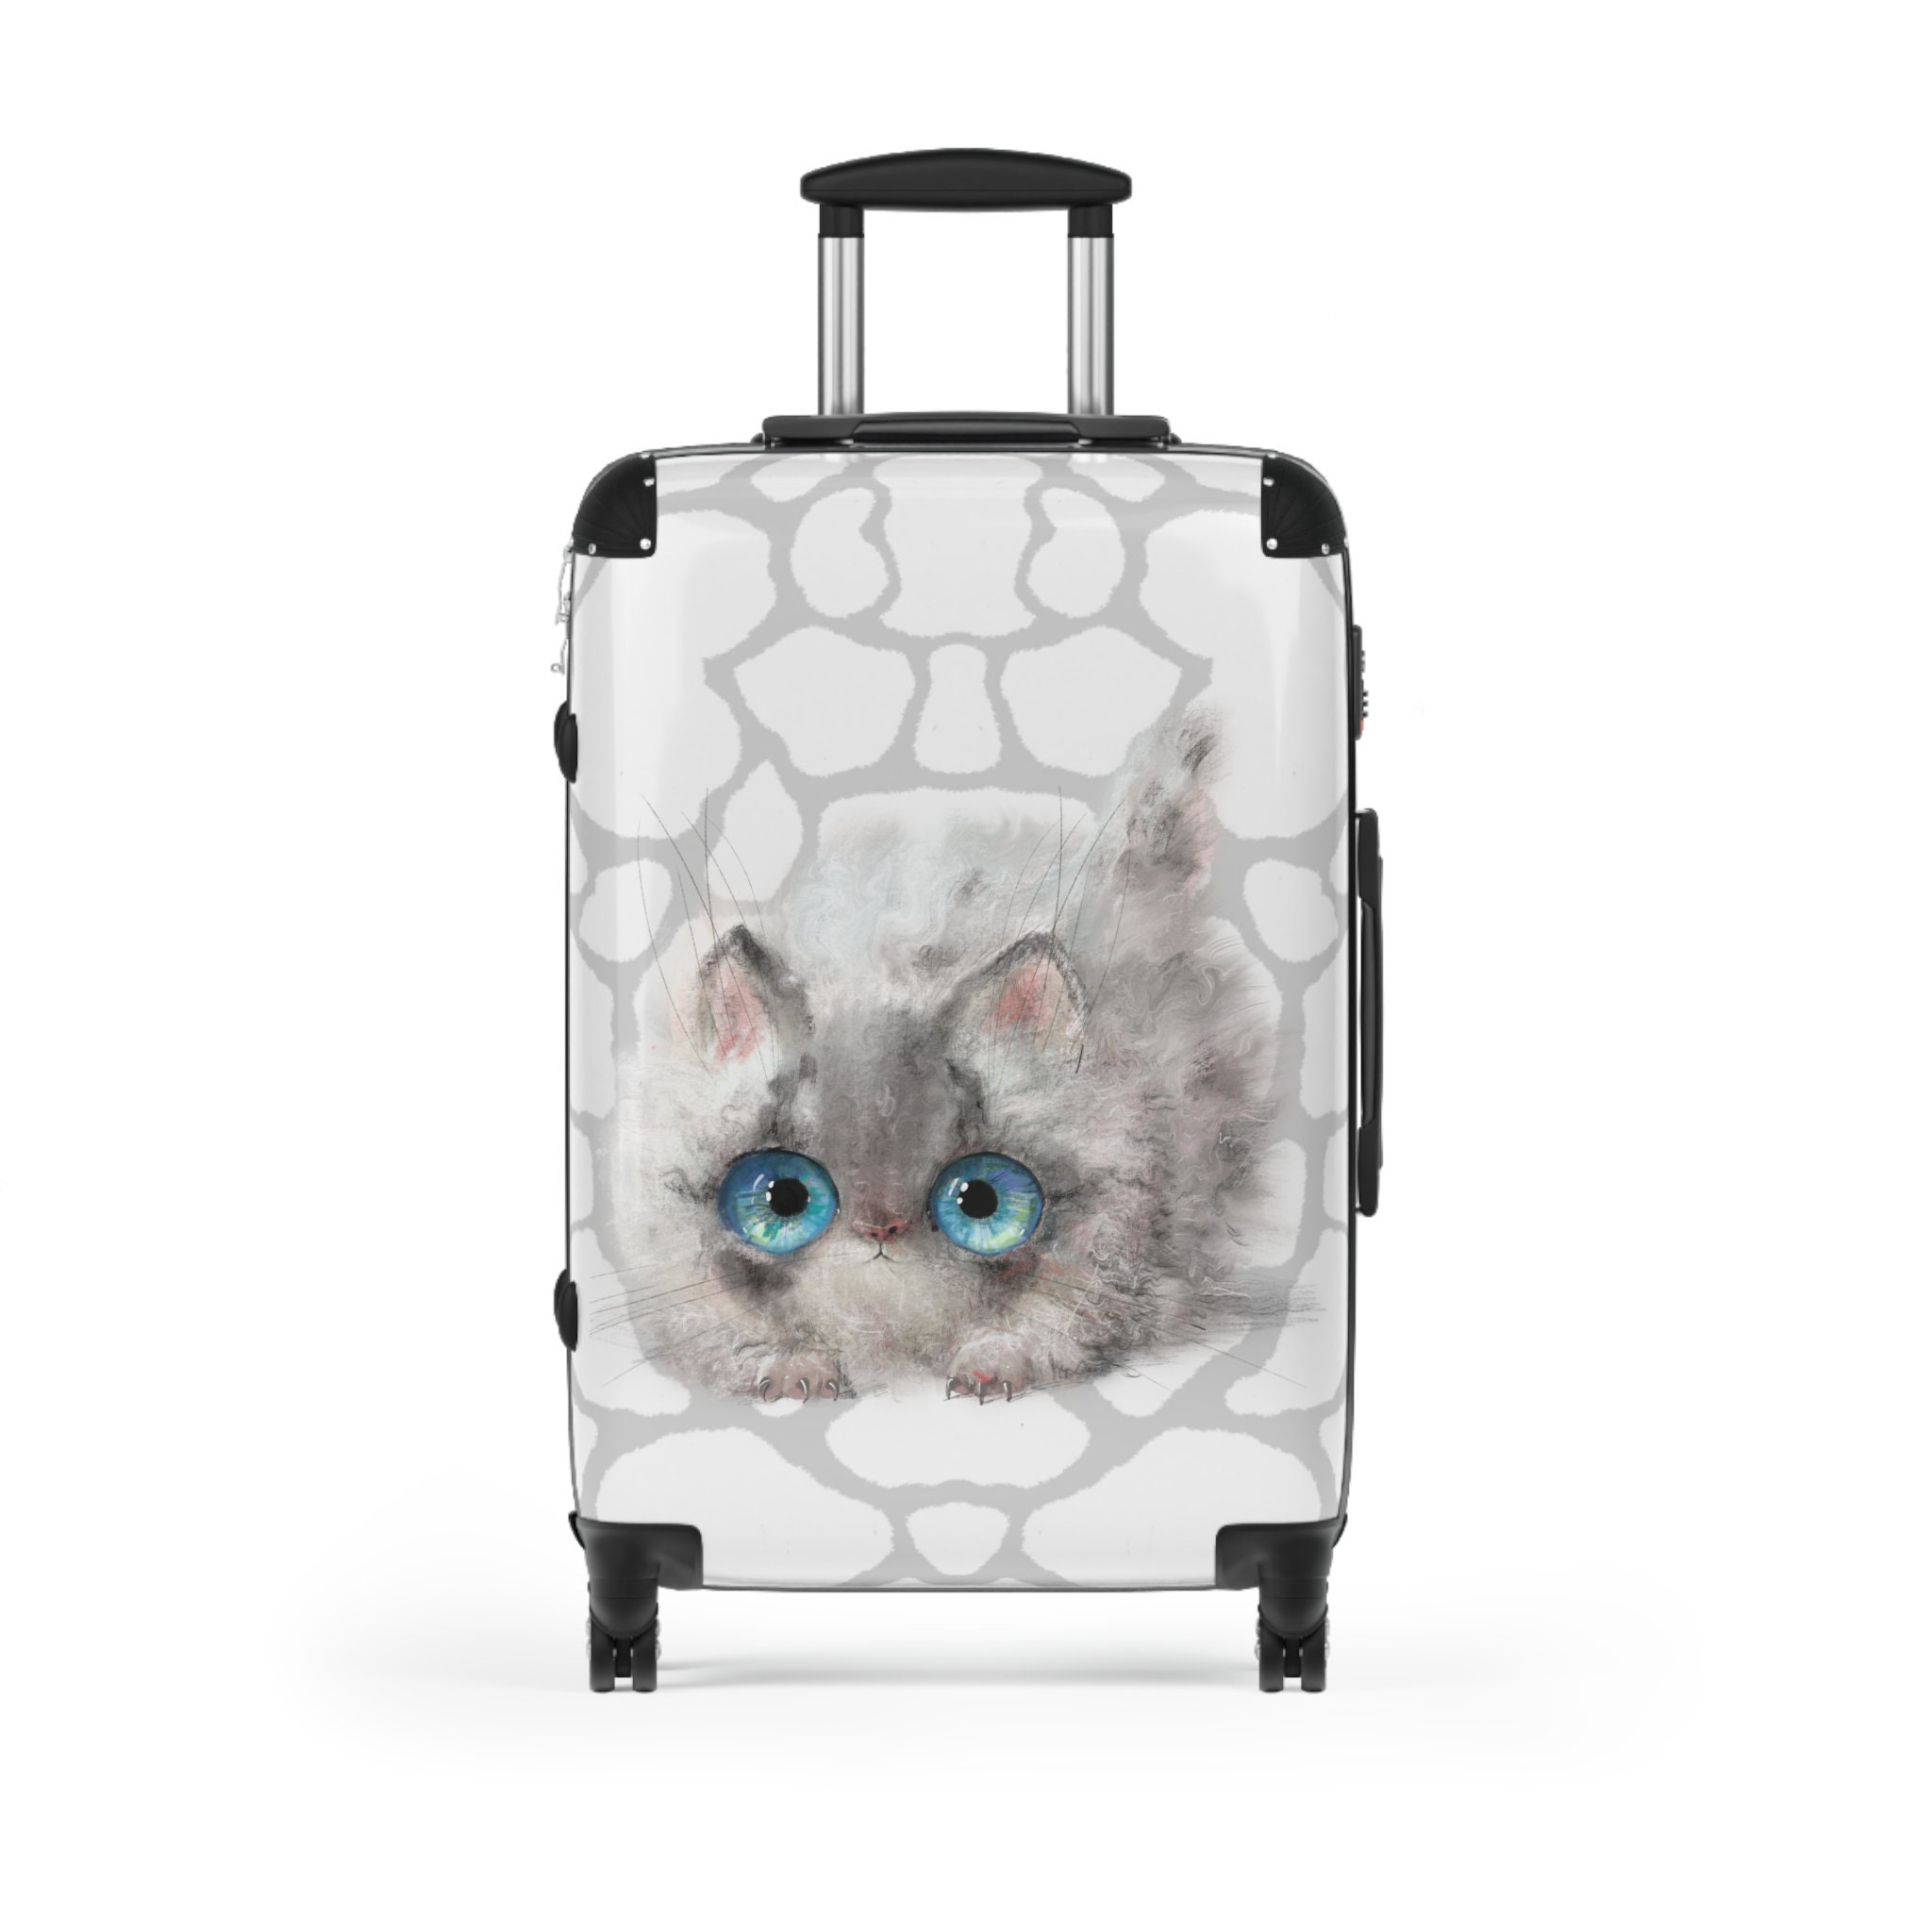 Ziggy The Kitten Suitcase, Cat Themed Luggage, Kitten Inspired Travel Accessories, Adorable Childrens Luggage, Unique Travel Accessories